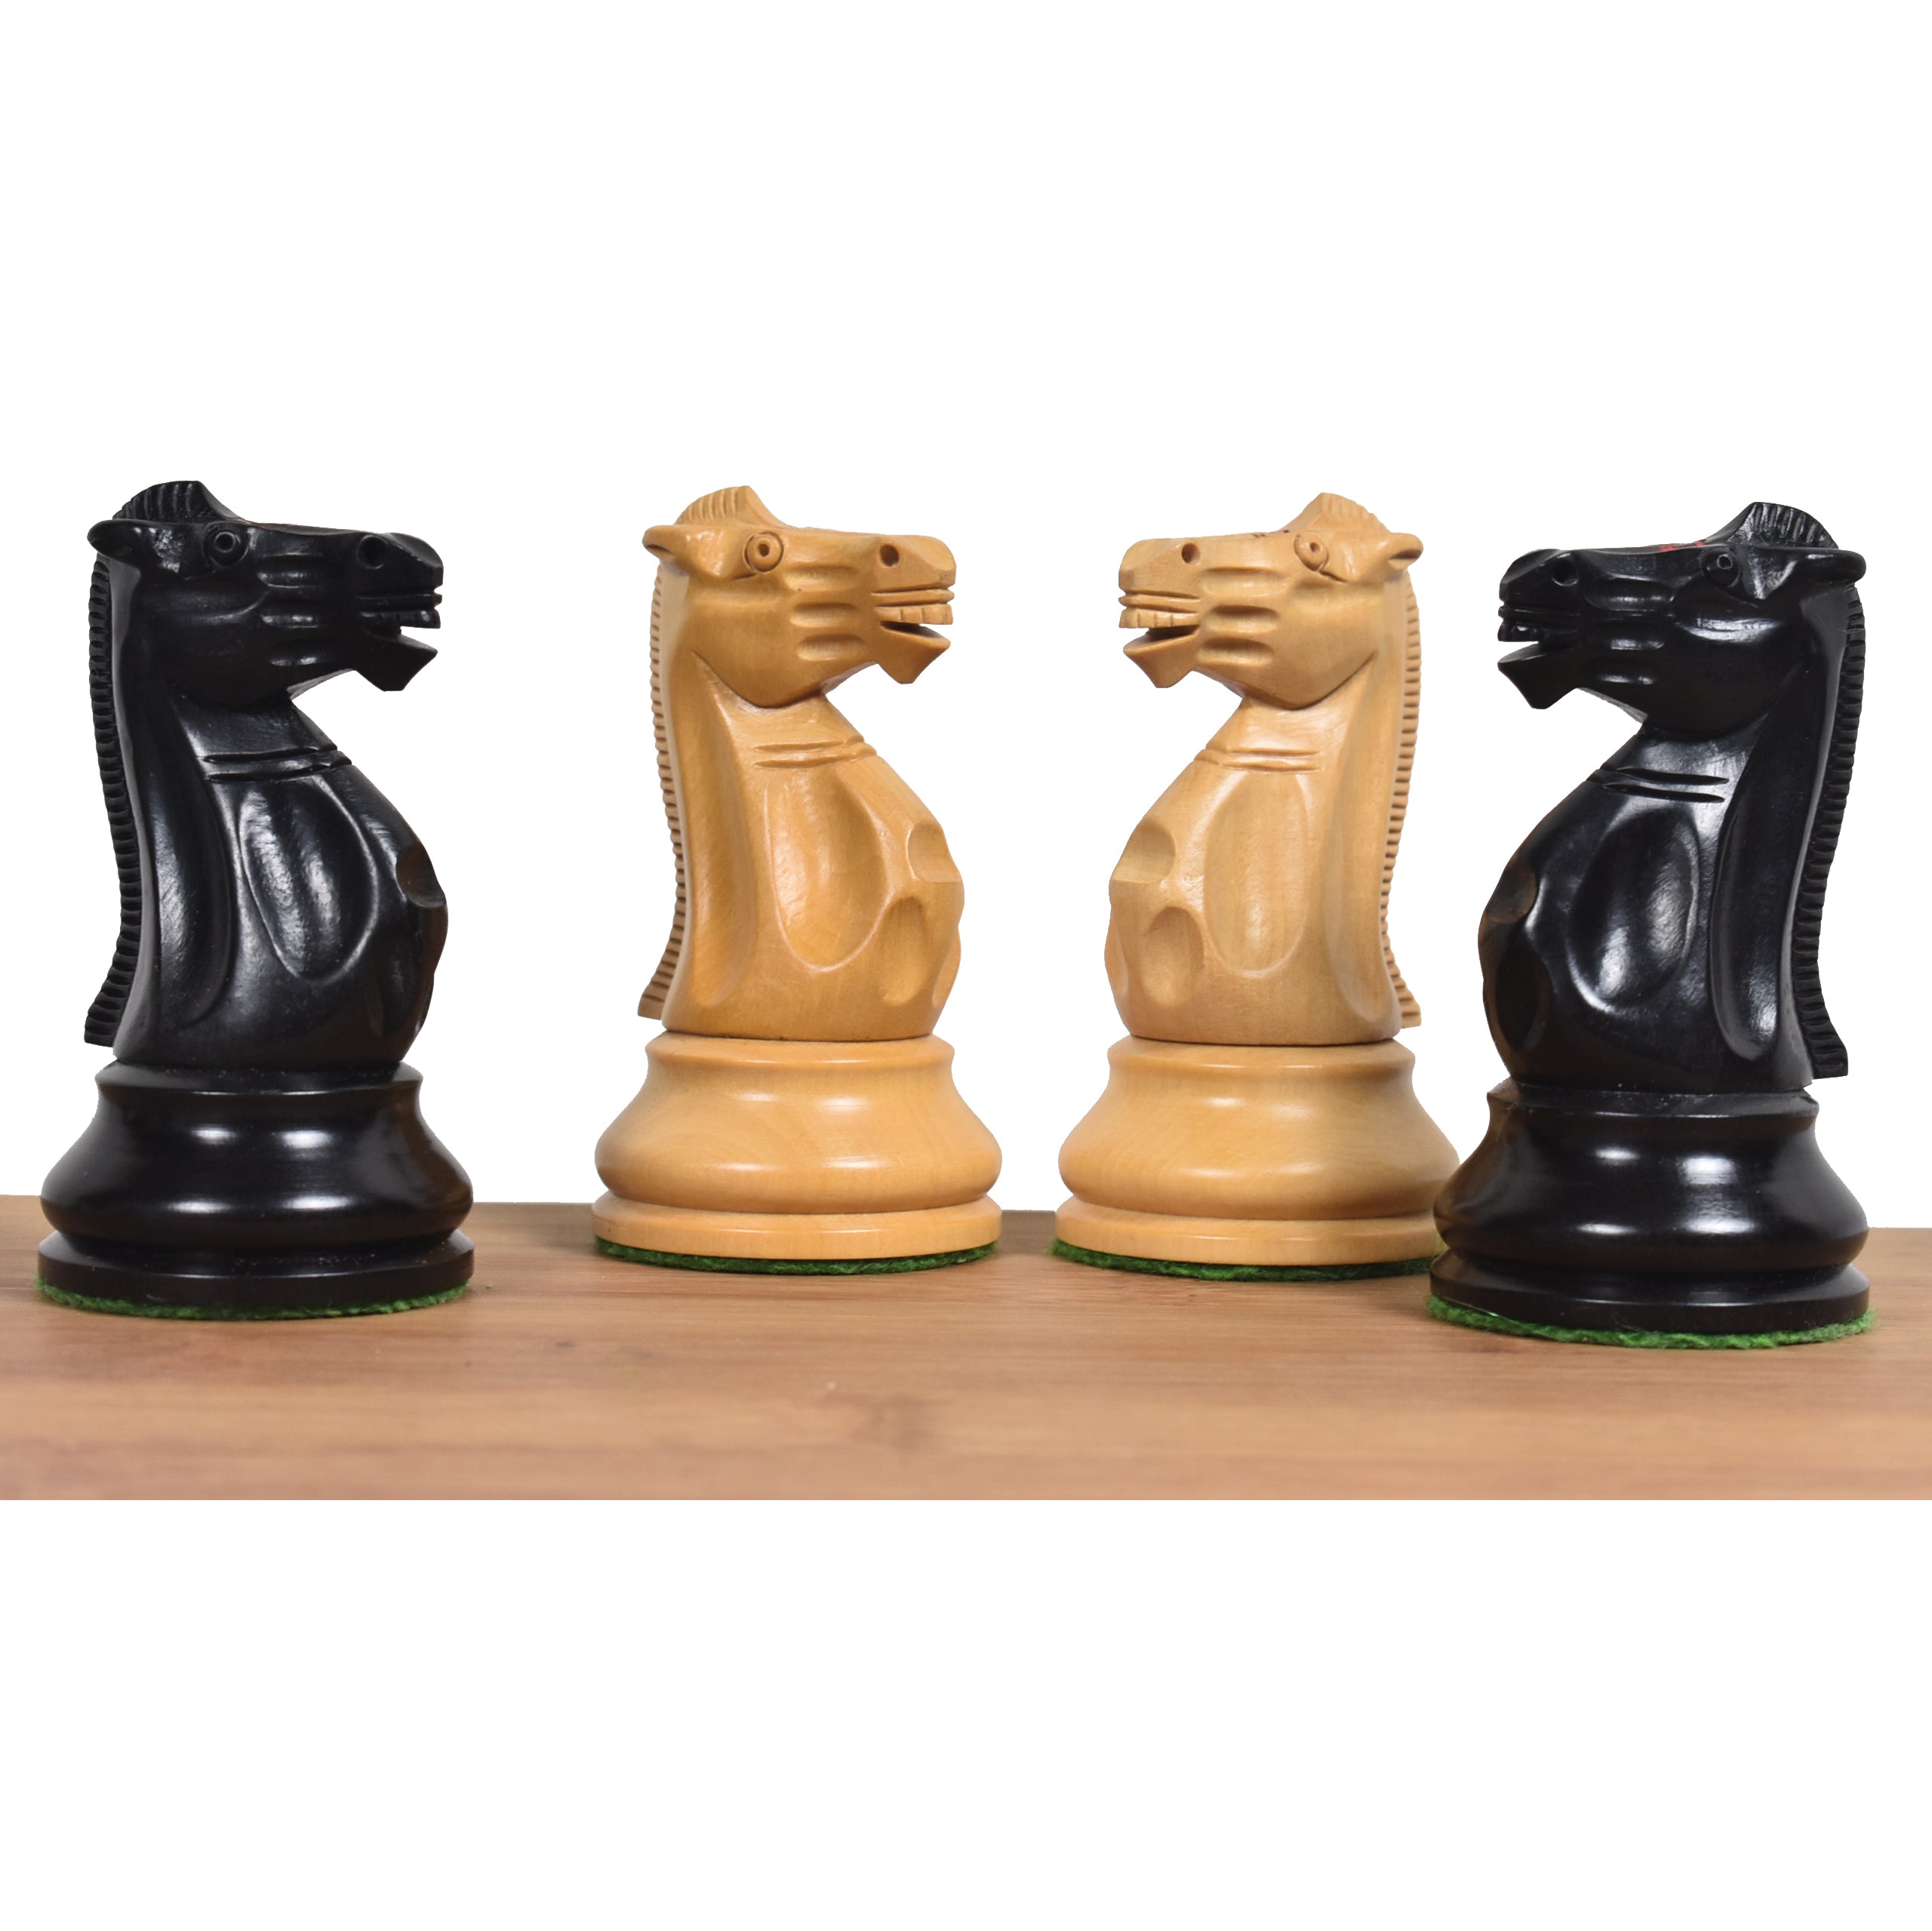 Combo of 3.9" Lessing Staunton Chess Set - Pieces in Ebony Wood With Board and Box